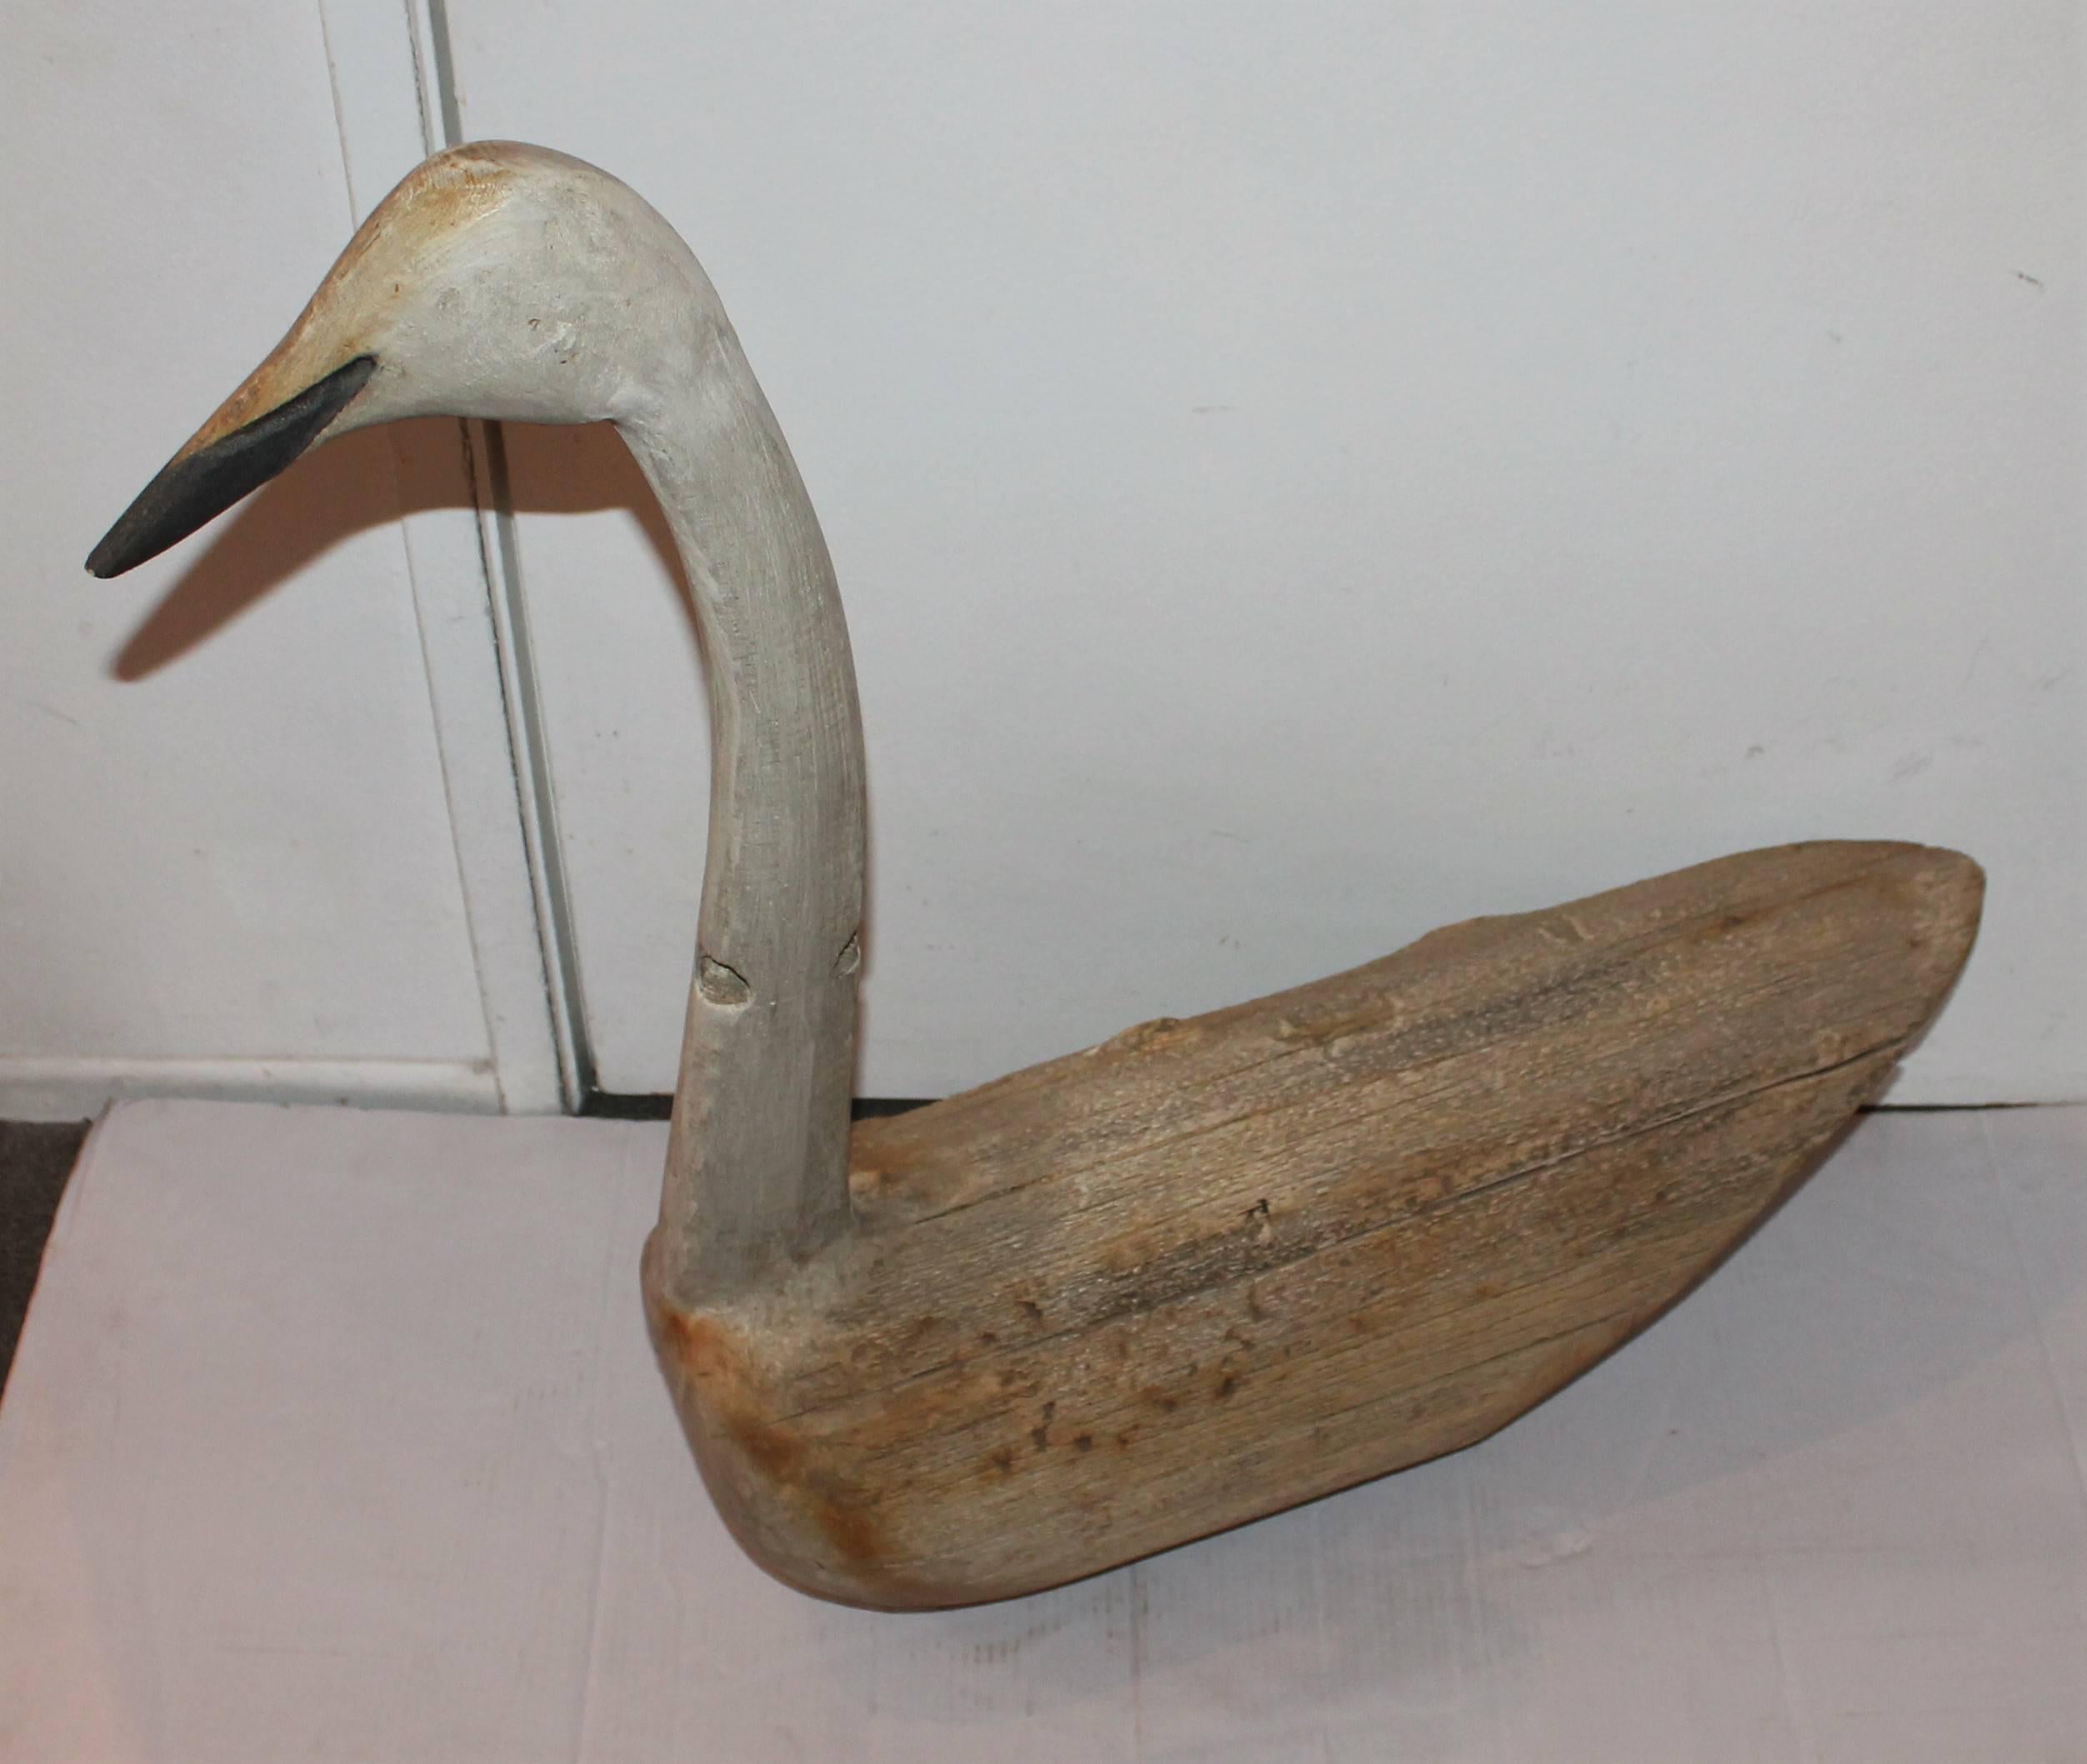 This amazing log goose decoy is made from a log and the neck and head are hand-carved to fit the log. There is amazing patina to the body and neck areas of this decoy only created by age and use. There are incisions in the neck and to the body where